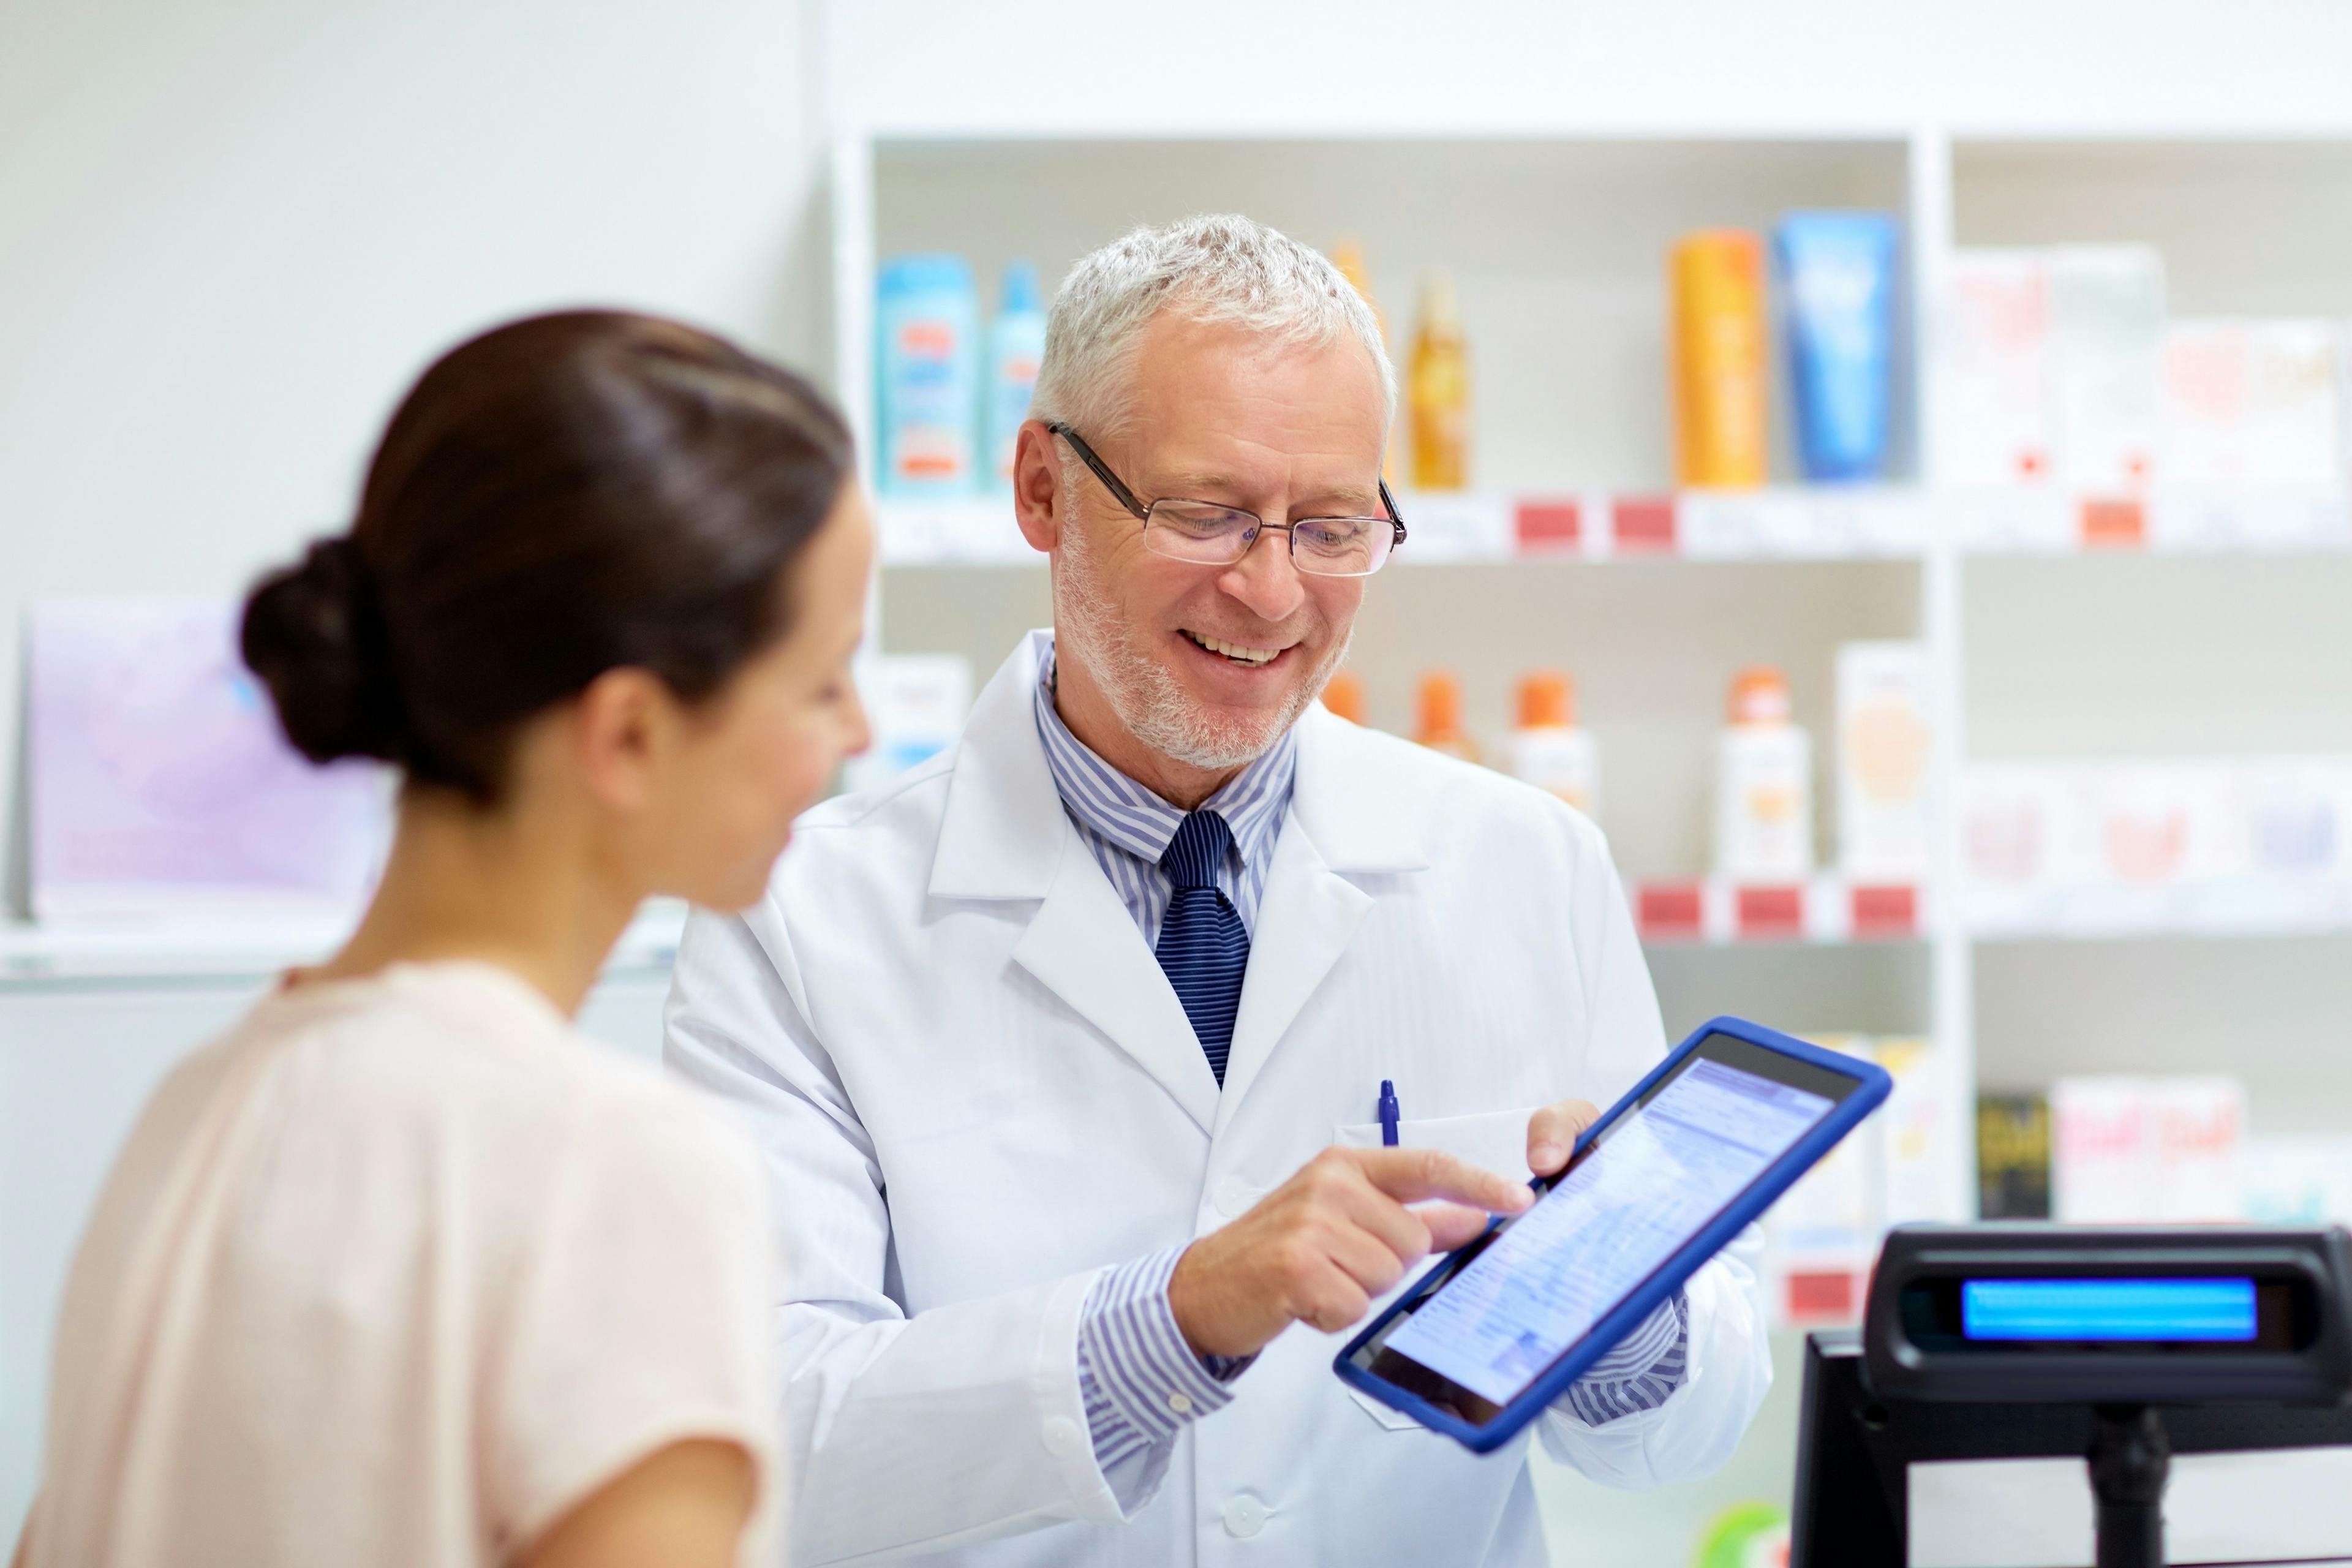 customer with tablet pc at pharmacy | Image Credit: Syda Productions - stock.adobe.com